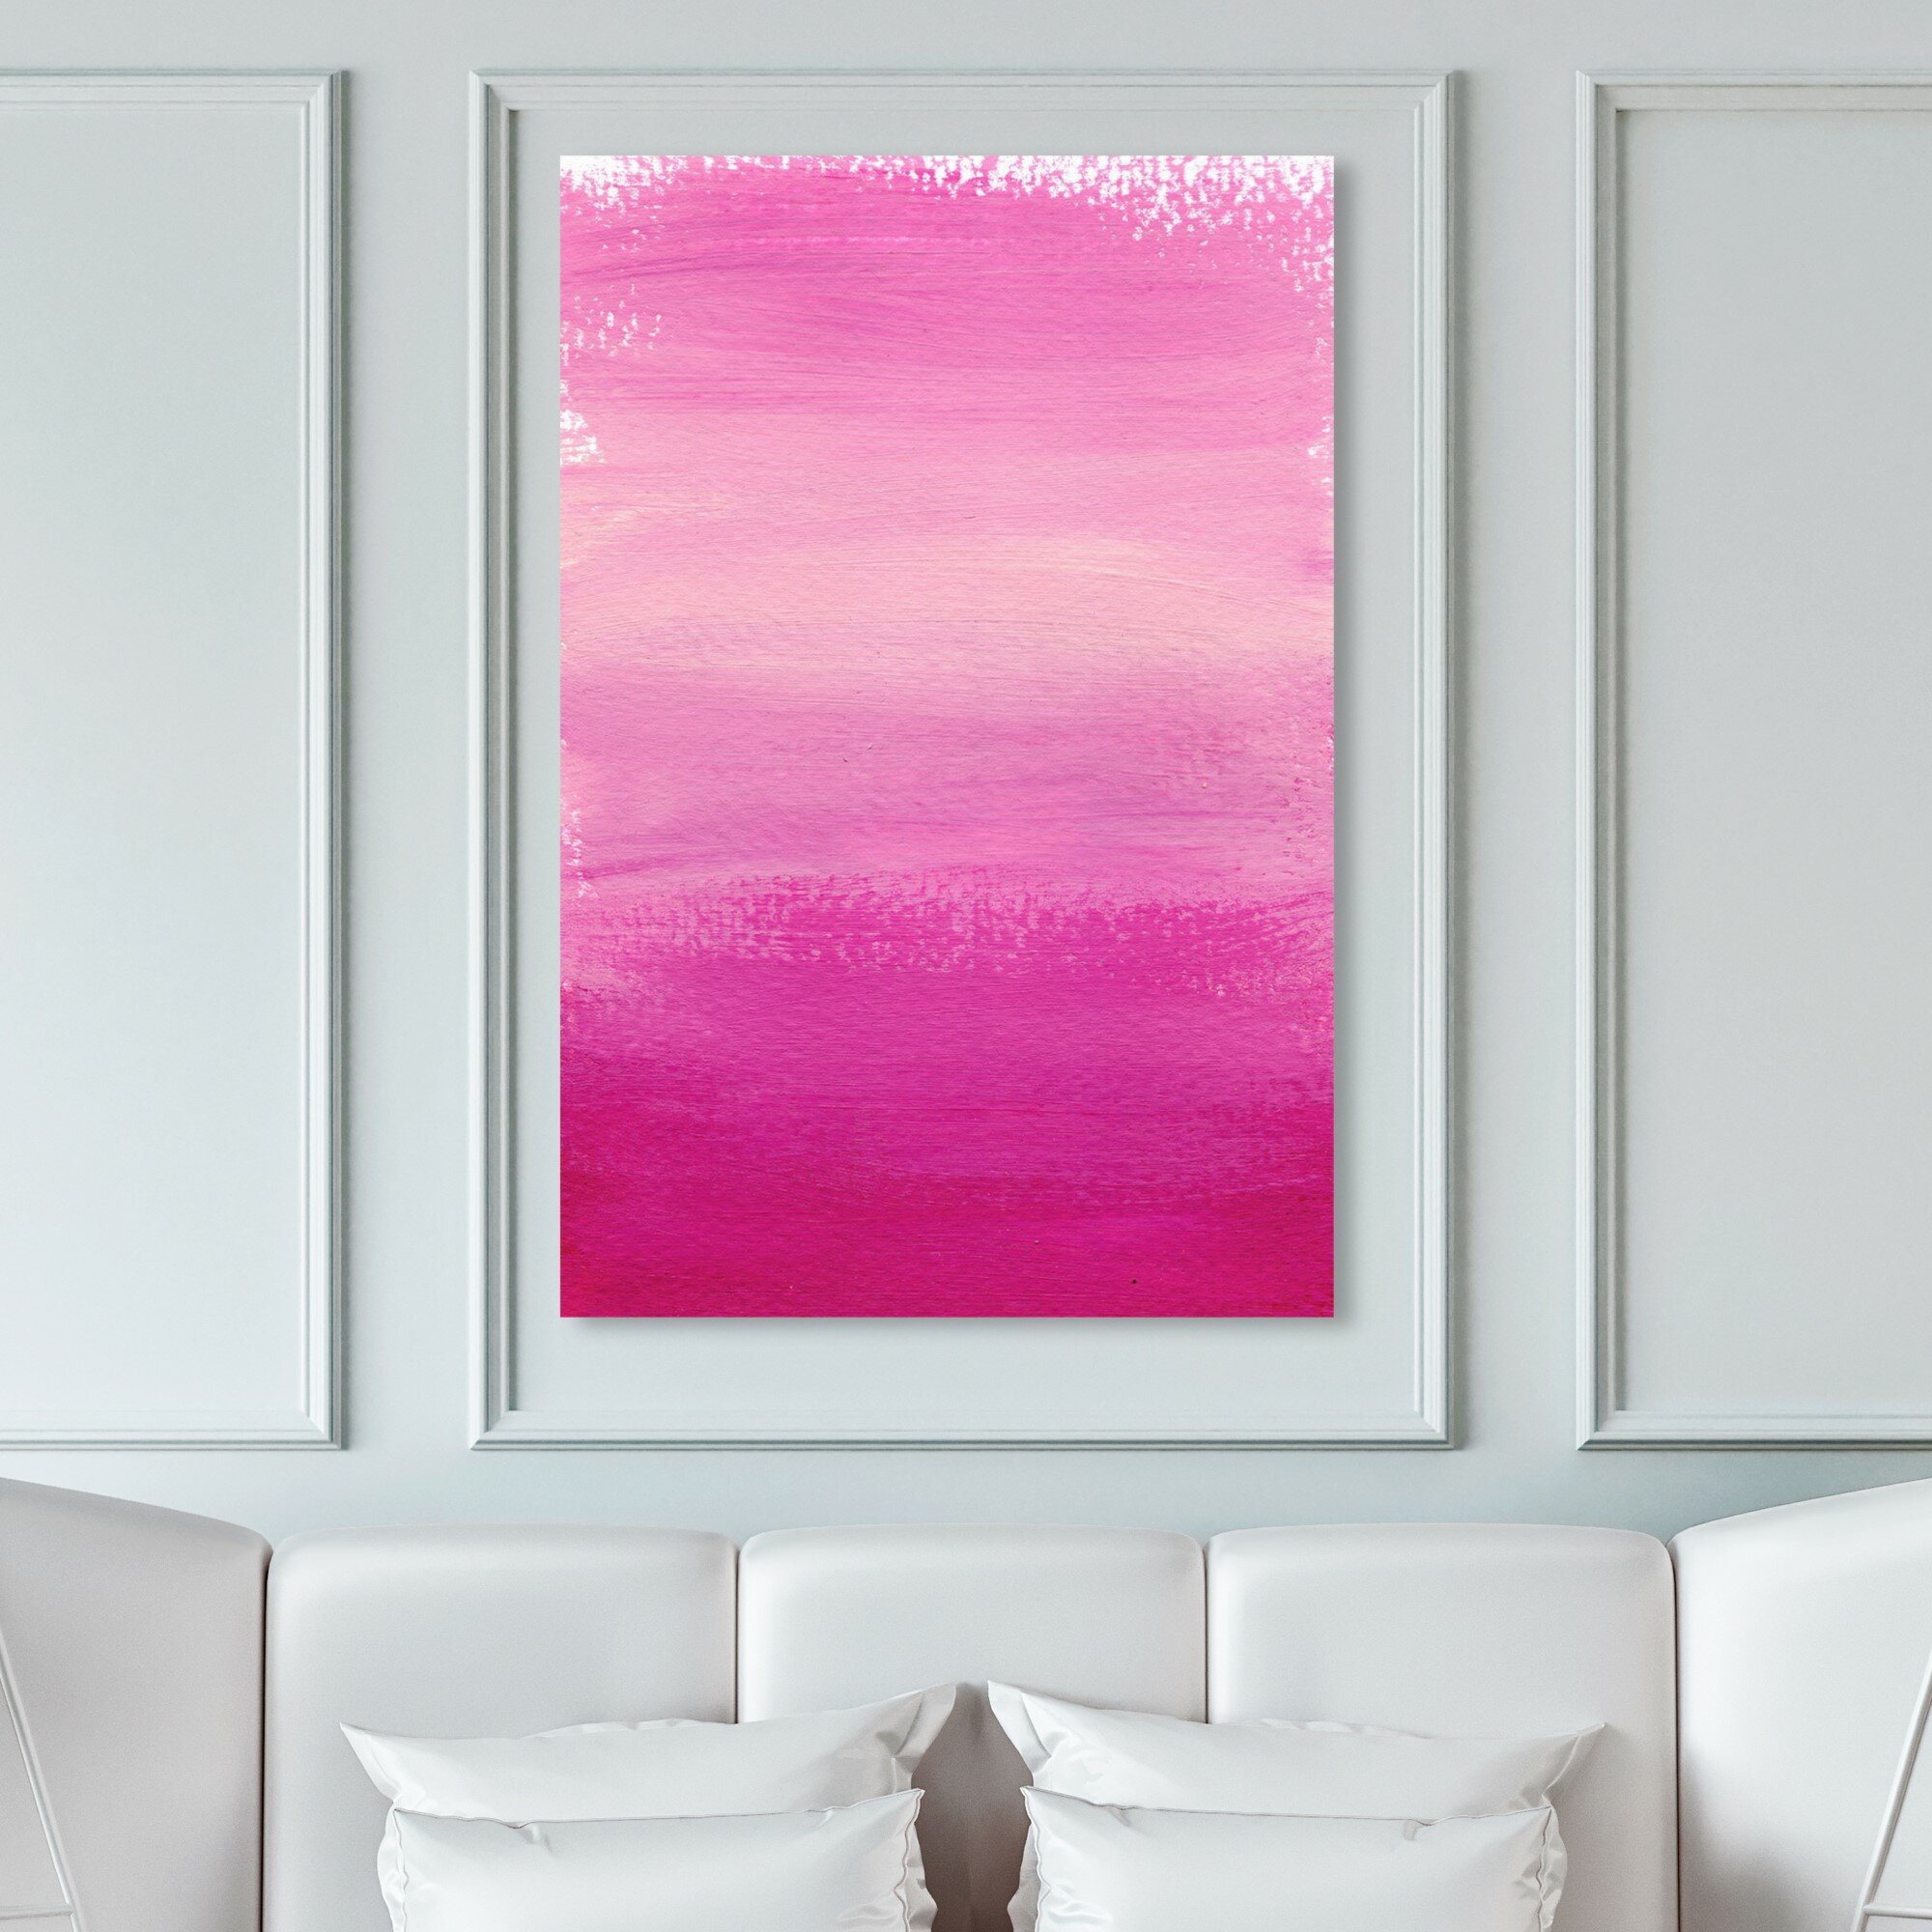 Landscape Painting: Acrylic Mini Canvas Art of a Pink Floral Sunset